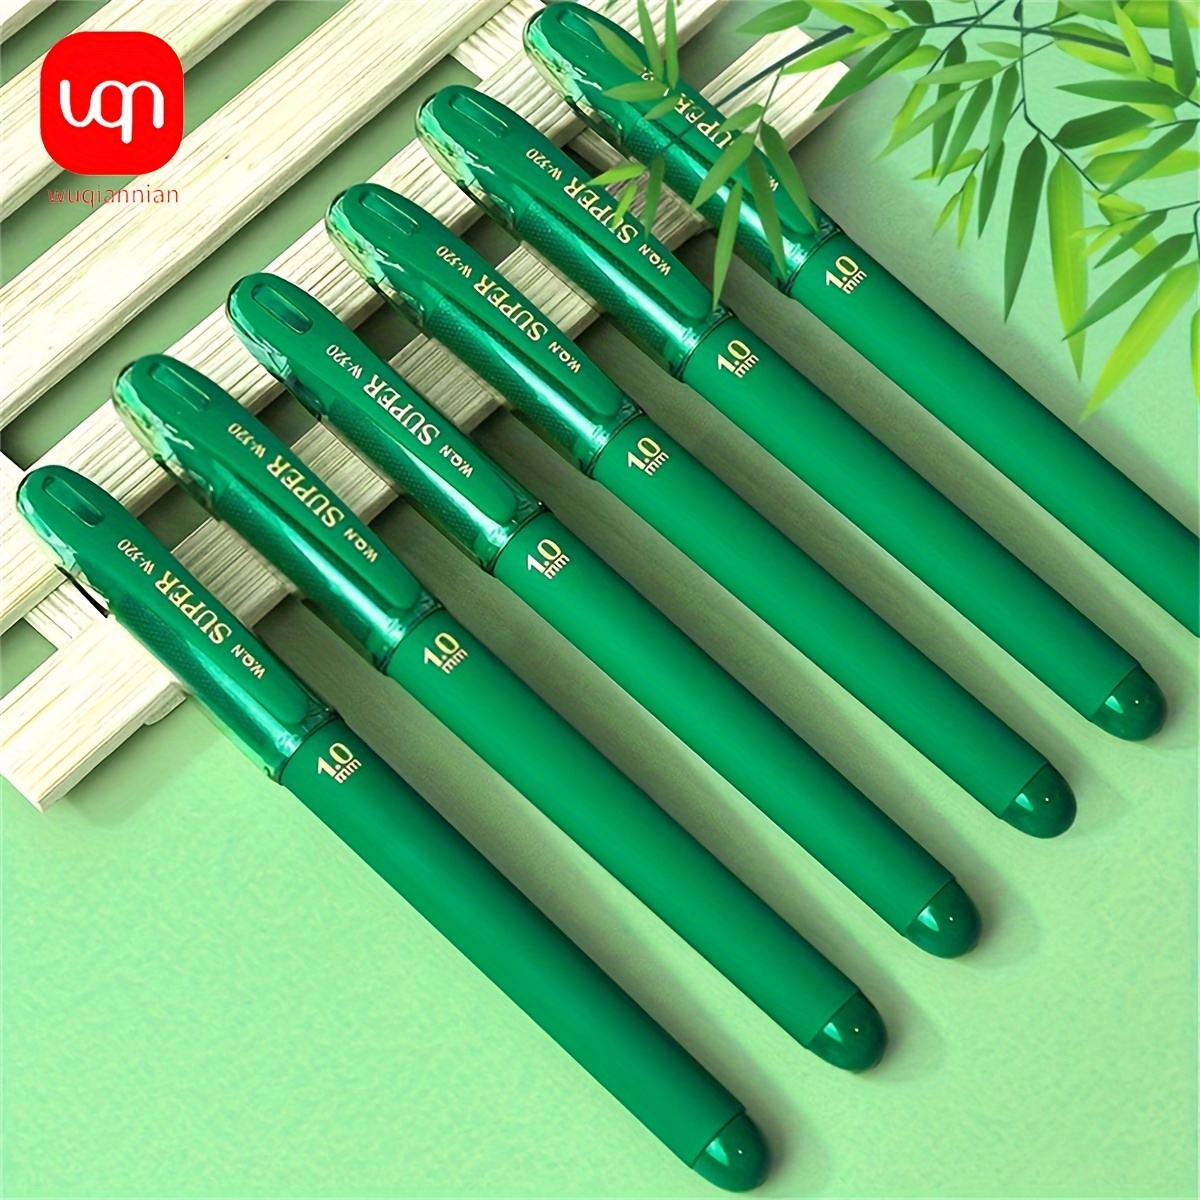 

3/6/12pcs Green Gel Pens, Quick Drying Green Ball Pen Stationery, Pen Tip 1.0mm, Green Ink, Smooth Writing, Personalized Large Capacity Refill, Hard Pen Calligraphy Pen Office Supplies/school Supplies